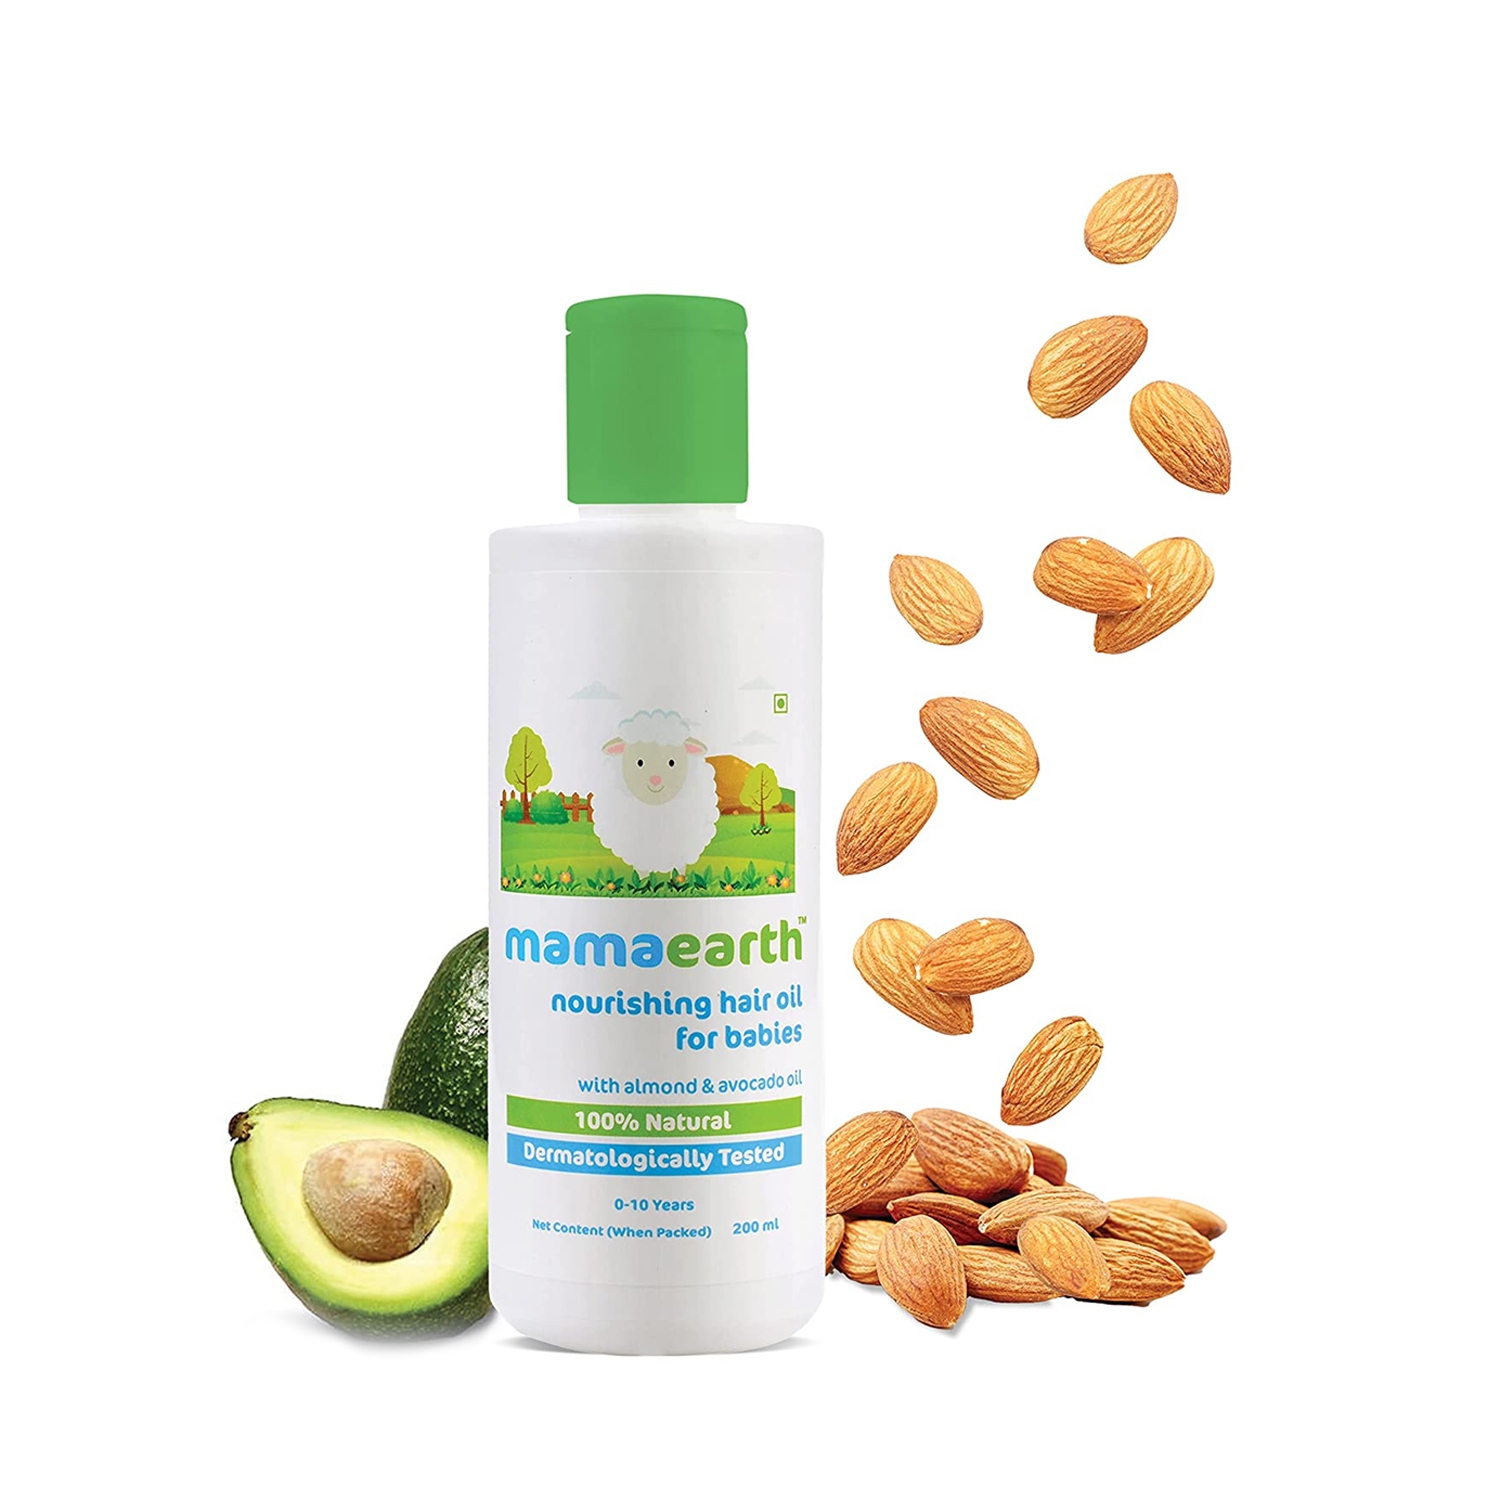 Mamaearth | Mamaearth Nourishing Hair Oil for Babies with Almond & Avocado Oil (200ml)